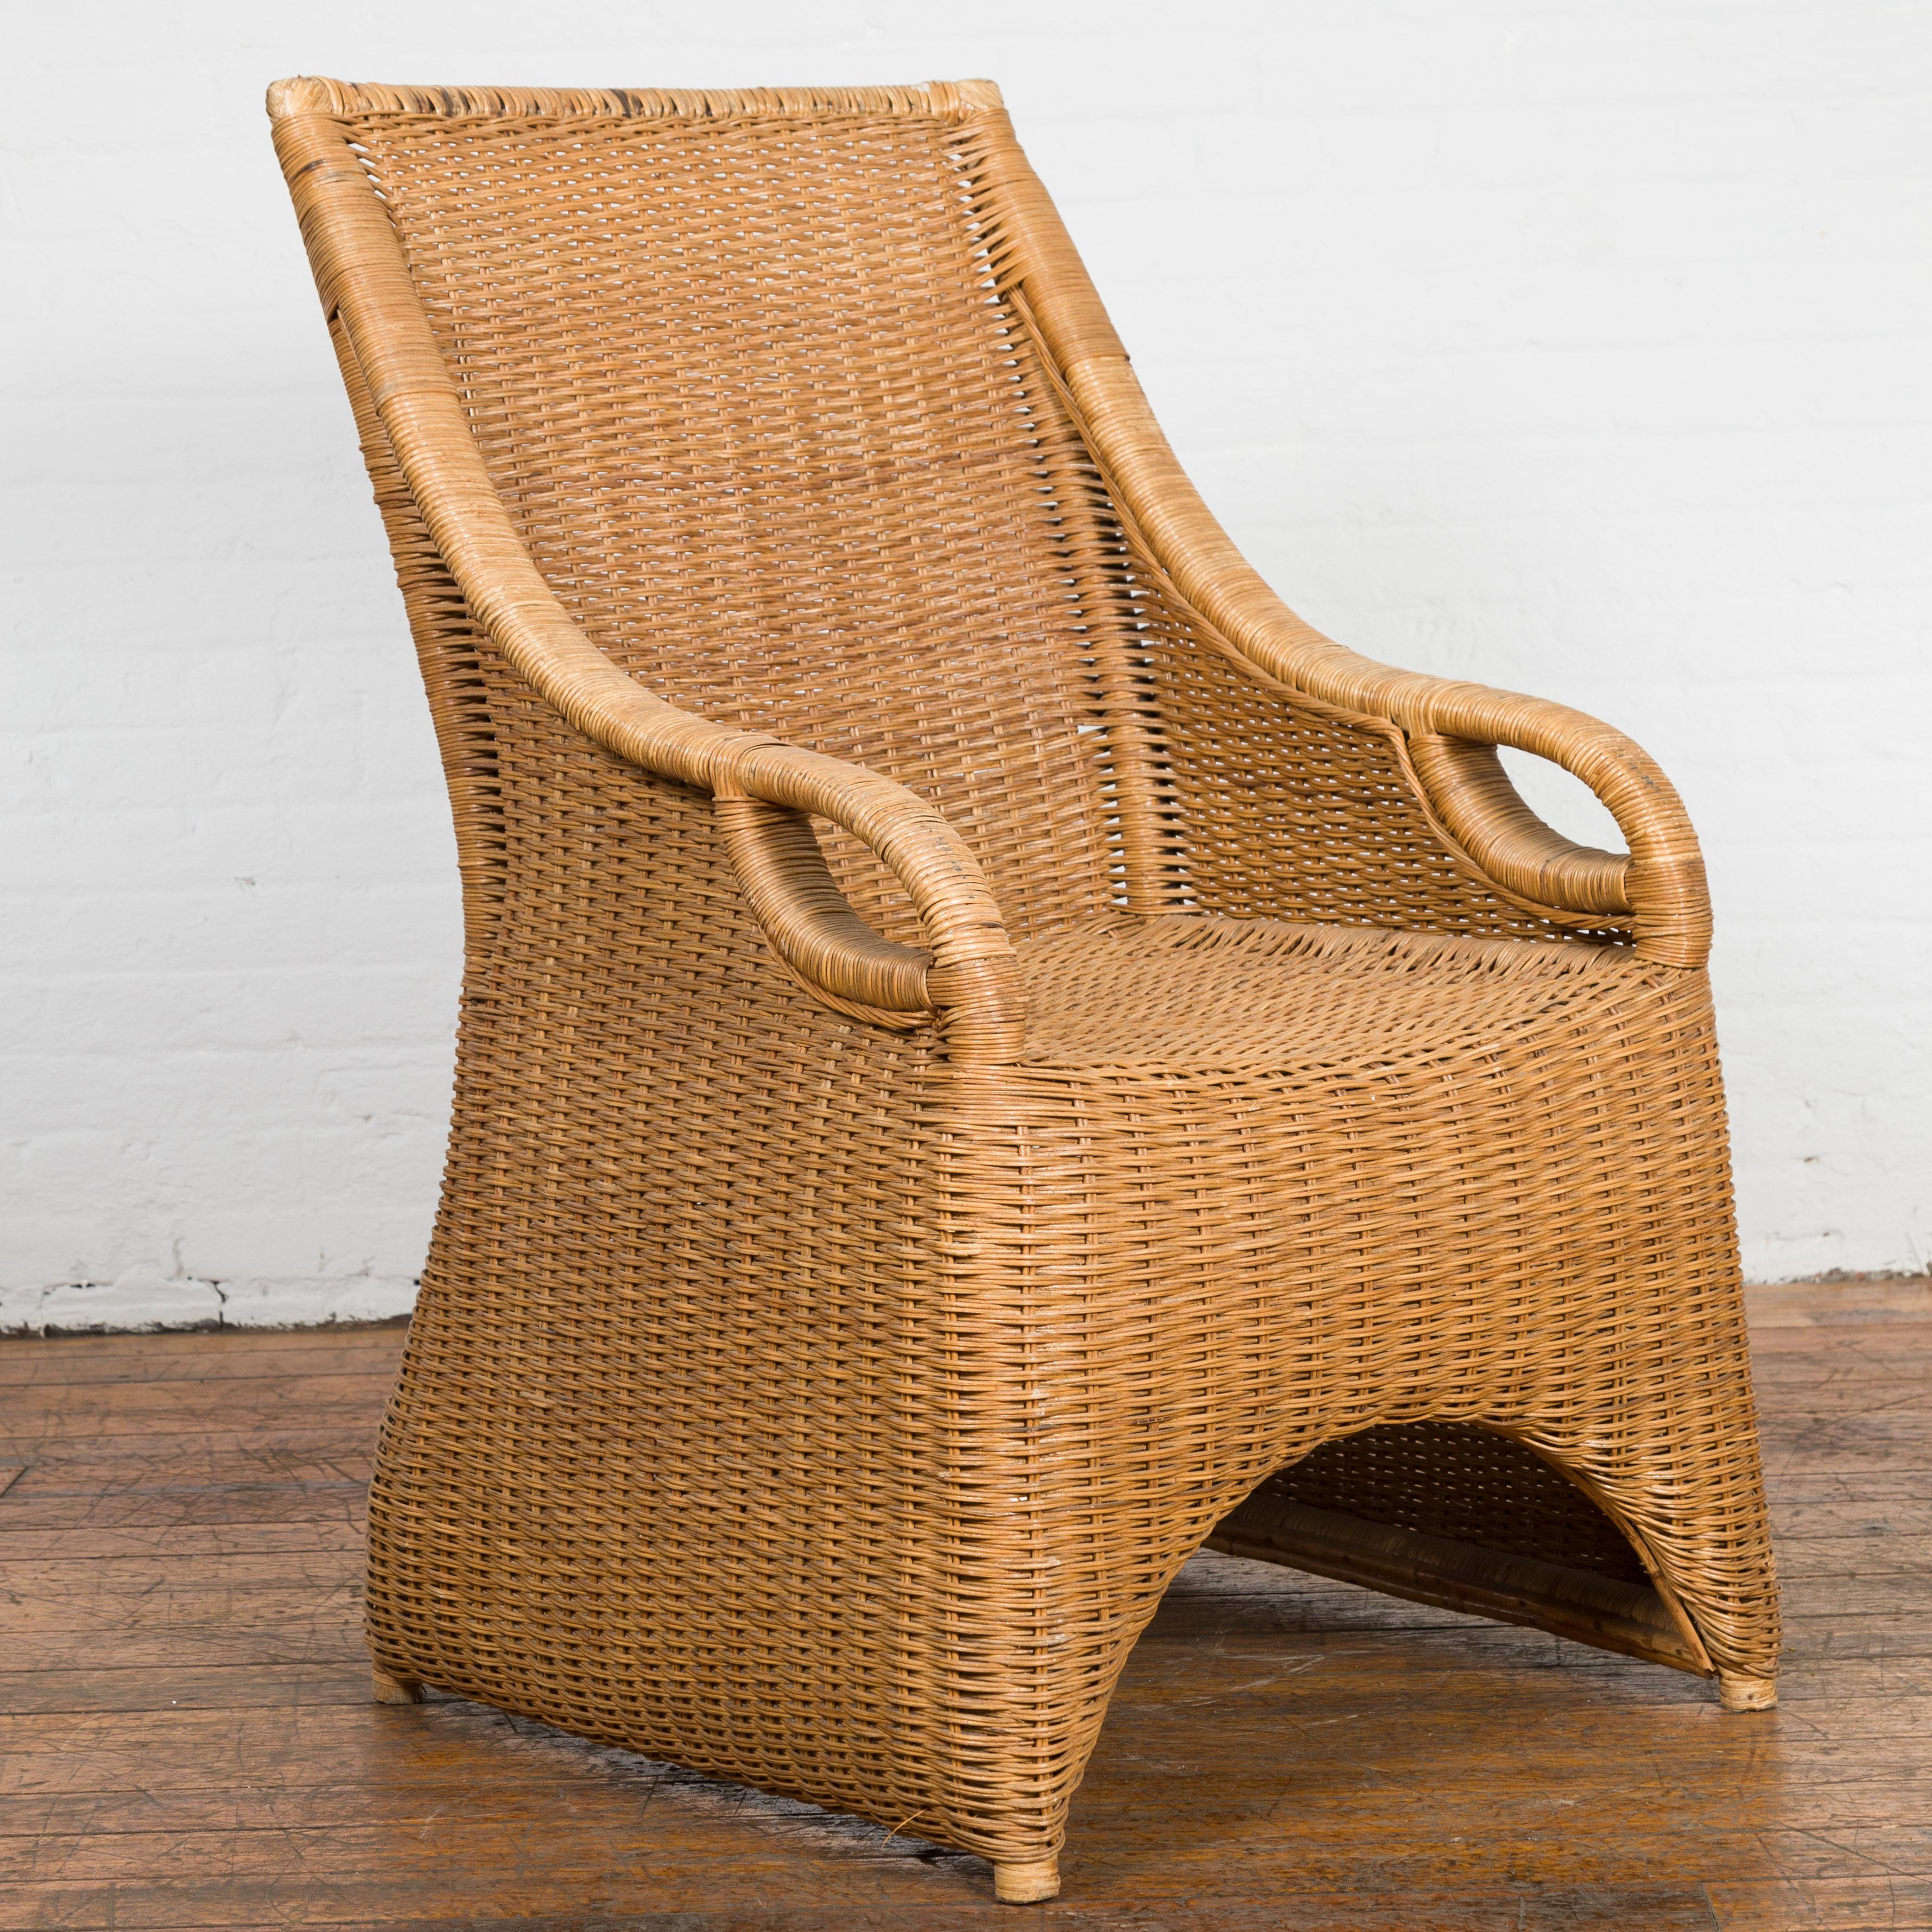 A vintage Burmese Country style woven rattan lounge chair from the Mid-20th Century, with slanted rectangular back, curving arms, looping accents and arching base. Created in Burma during the midcentury period, this Country style lounge chair